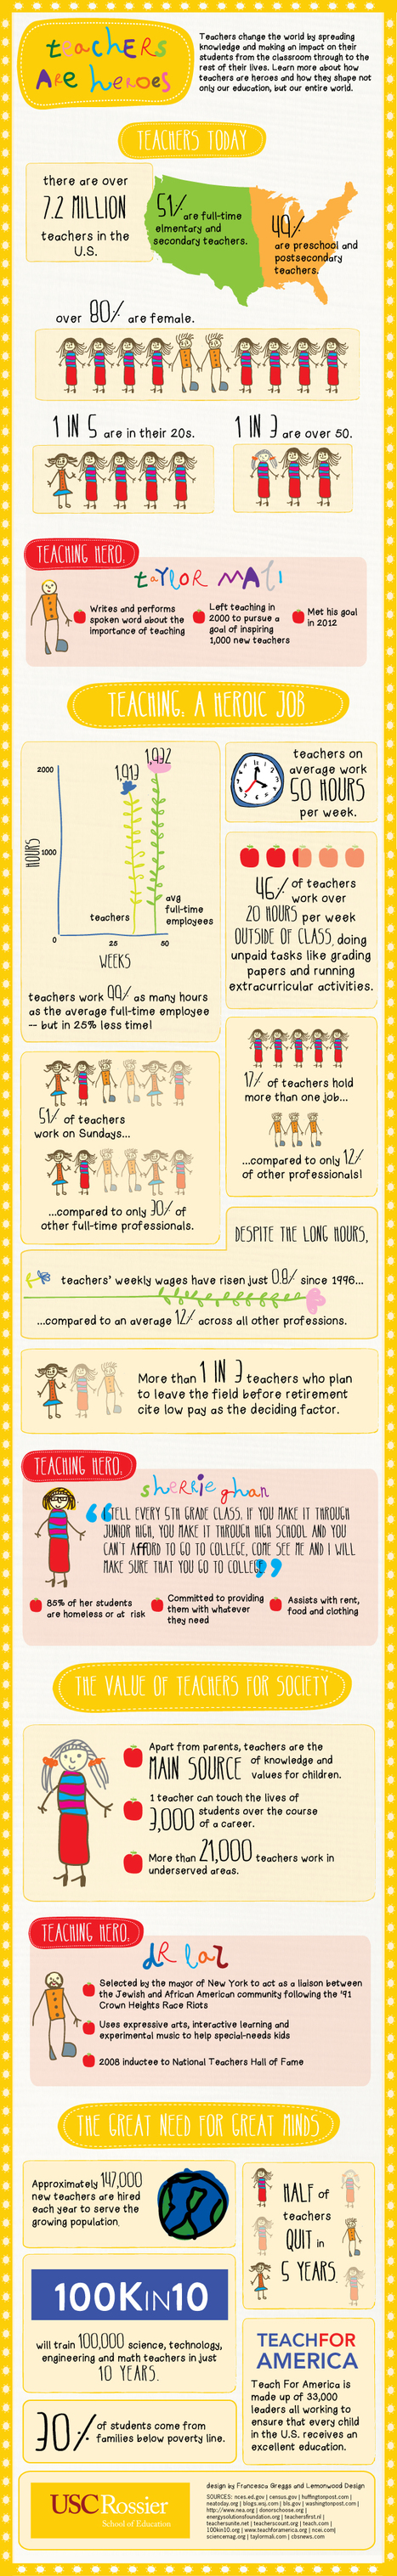 20 Things To Know About The Current State Of Teaching [Infographic] | Latest Social Media News | Scoop.it